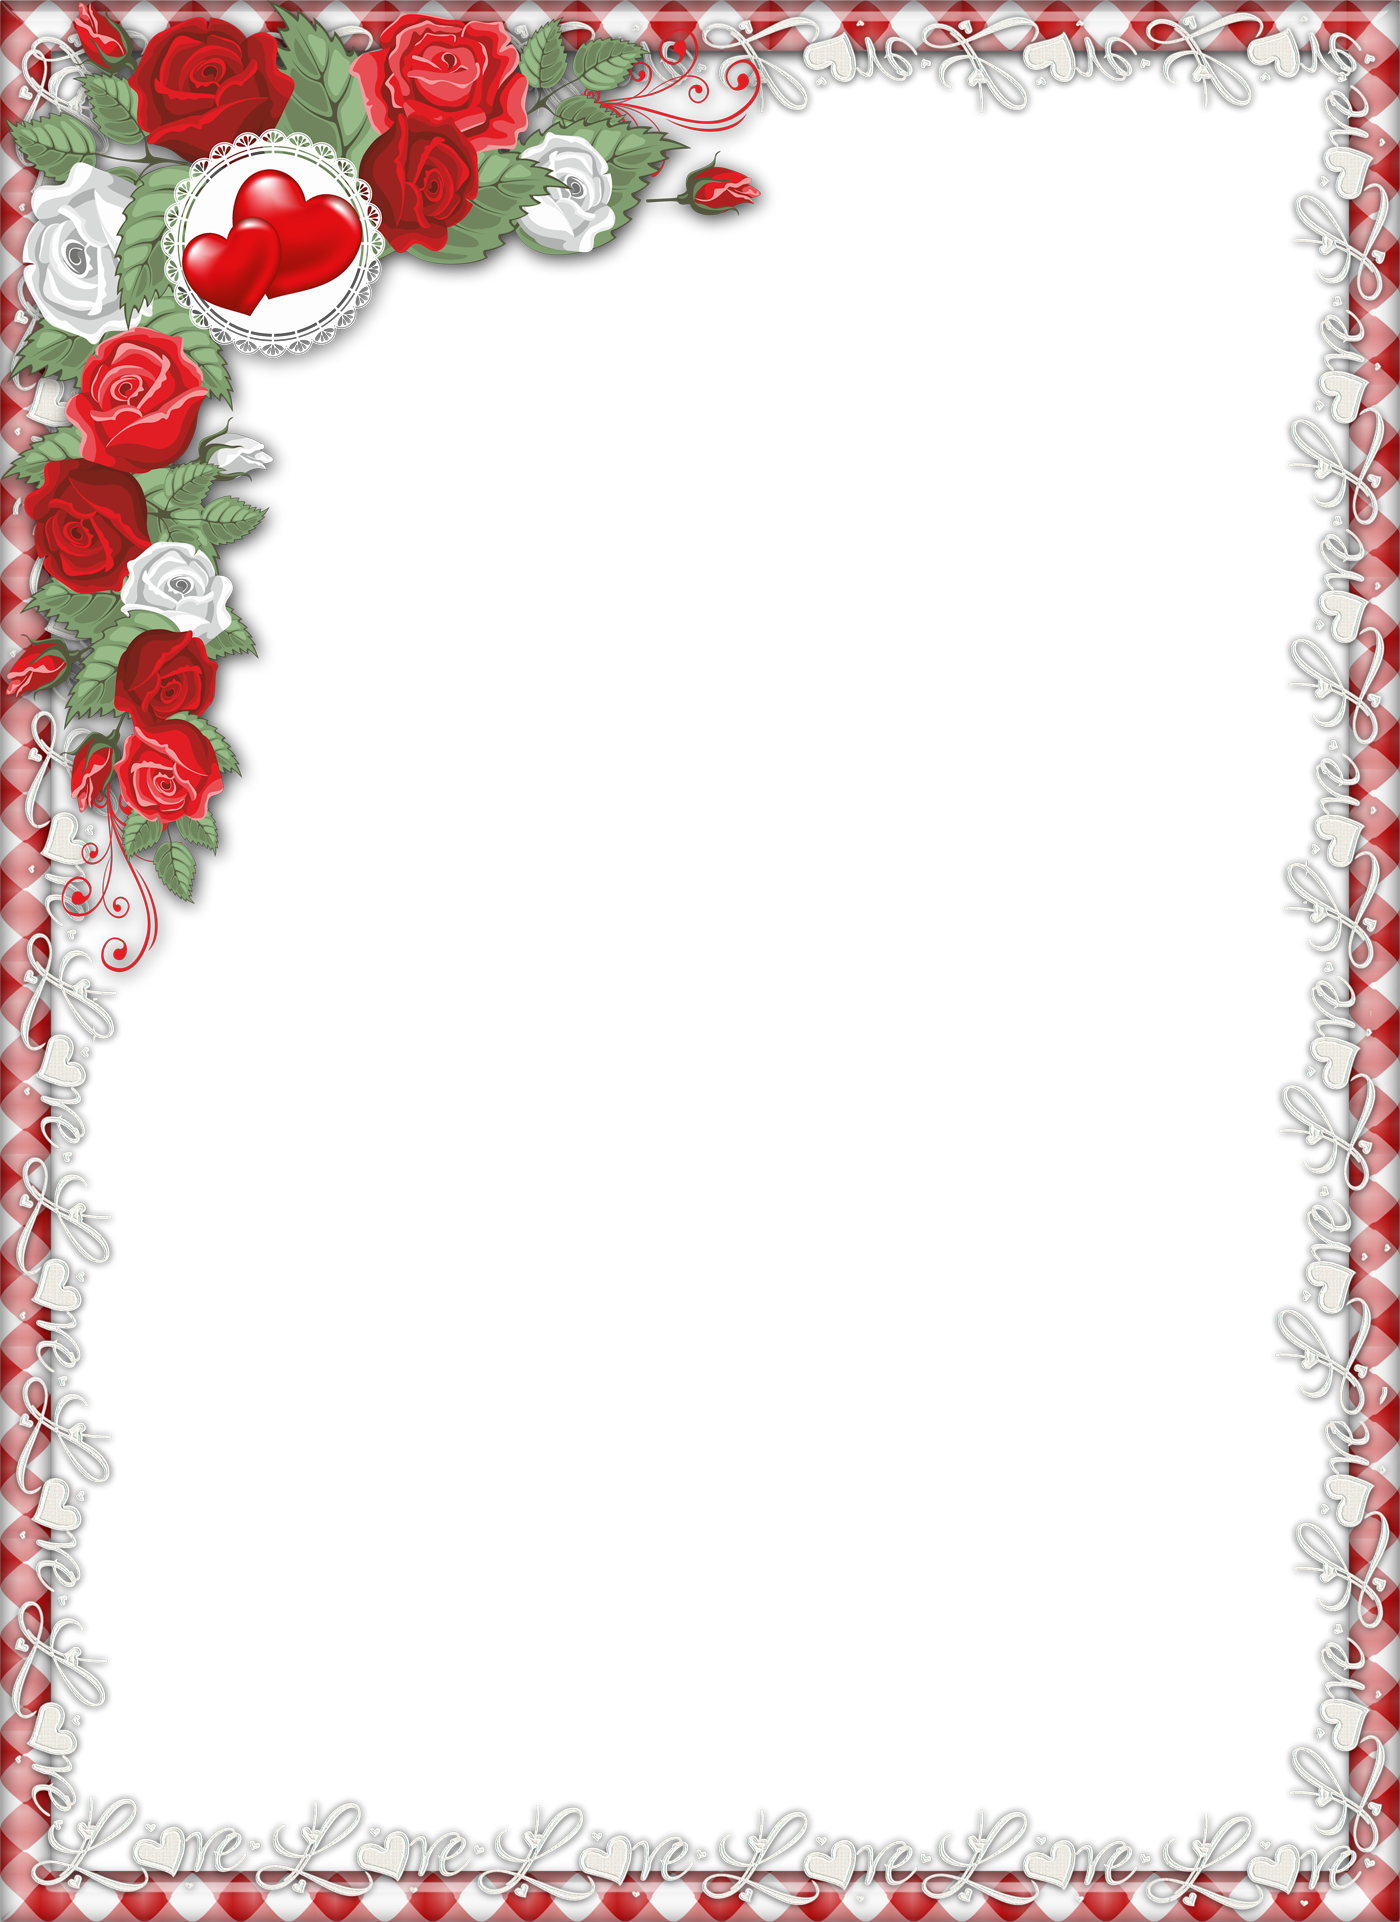 Shell clipart frame. Red love png transparent